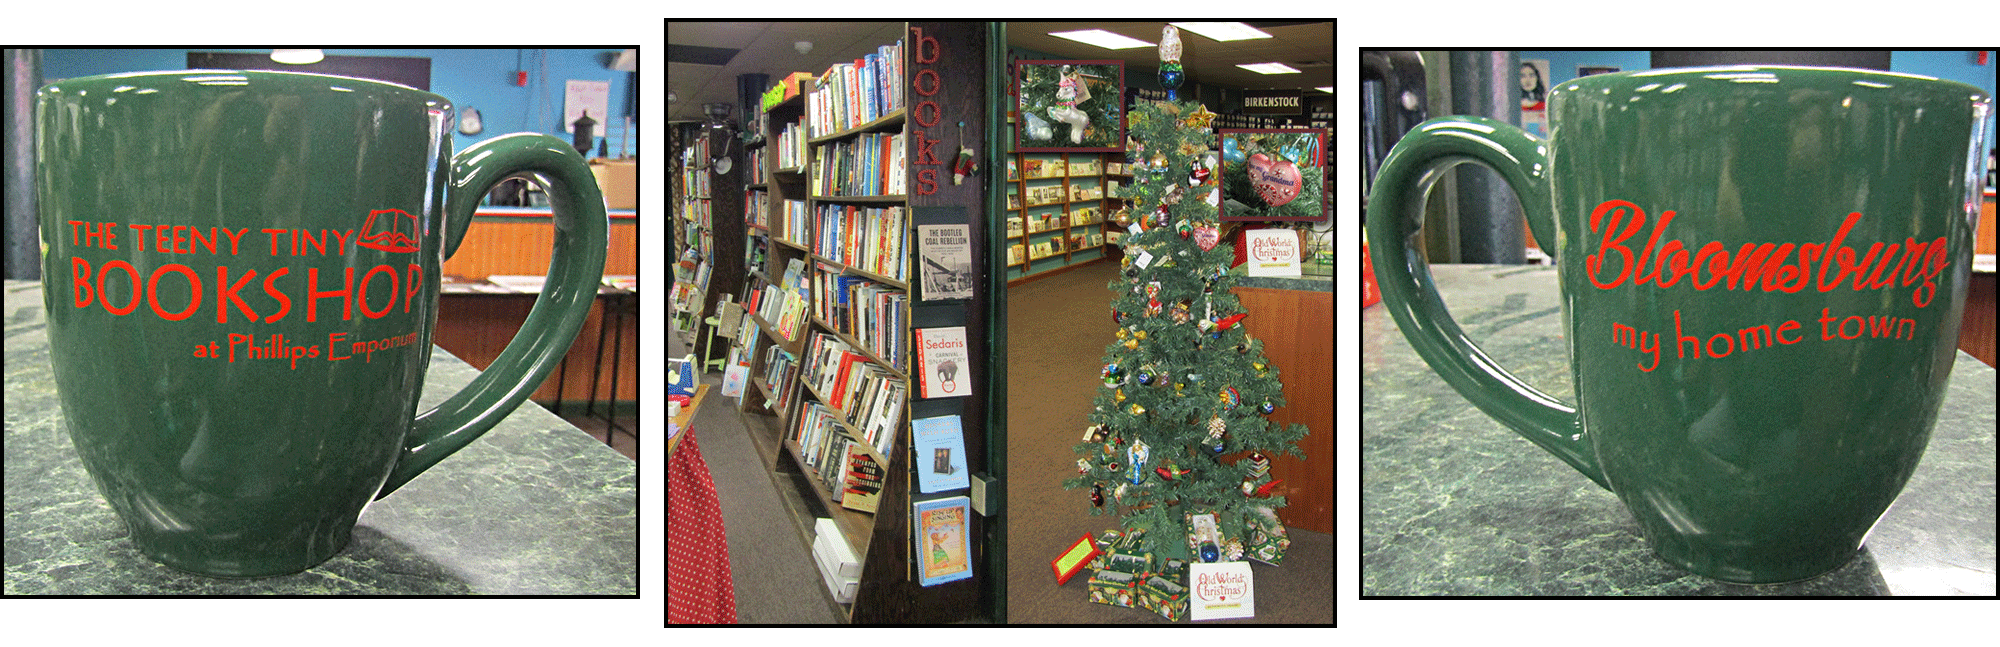 2 Cups , bookshop and Christmas tree with ornaments